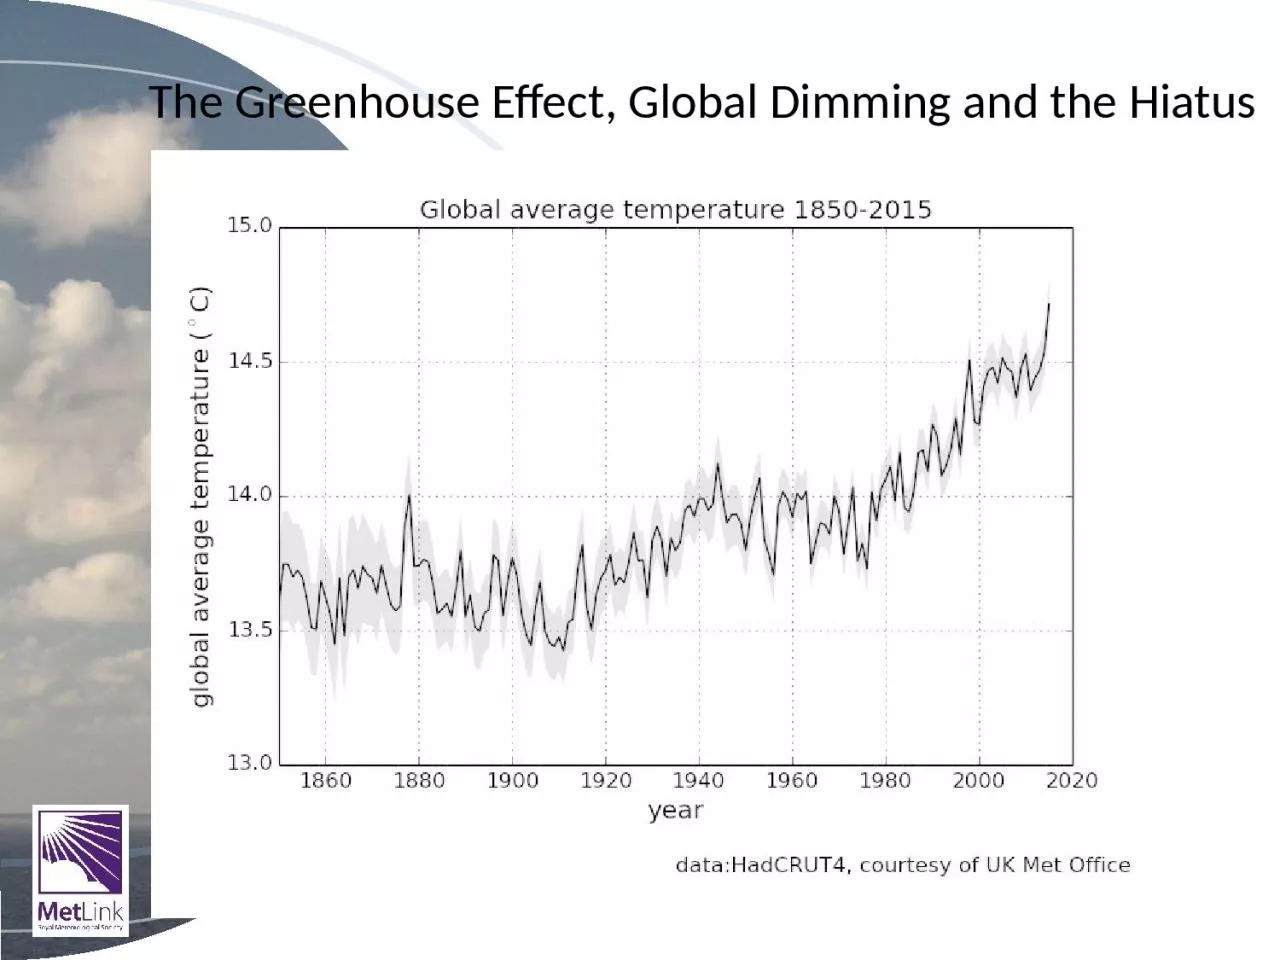 The Greenhouse Effect, Global Dimming and the Hiatus